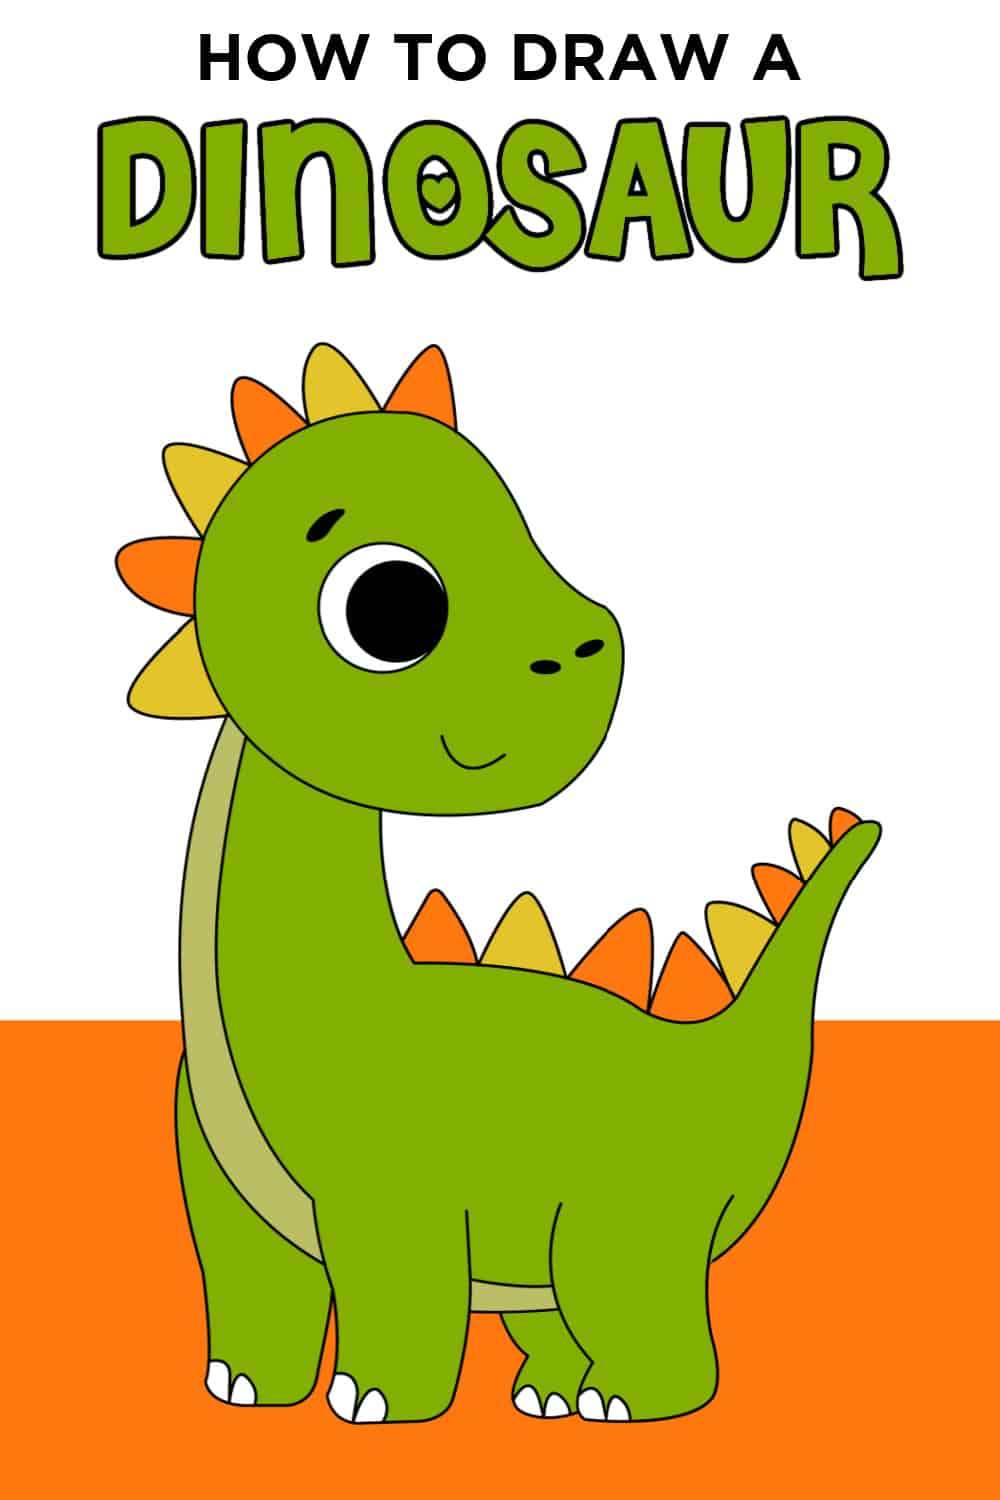 https://www.madewithhappy.com/wp-content/uploads/how-to-draw-a-dinosaur-easy.jpg